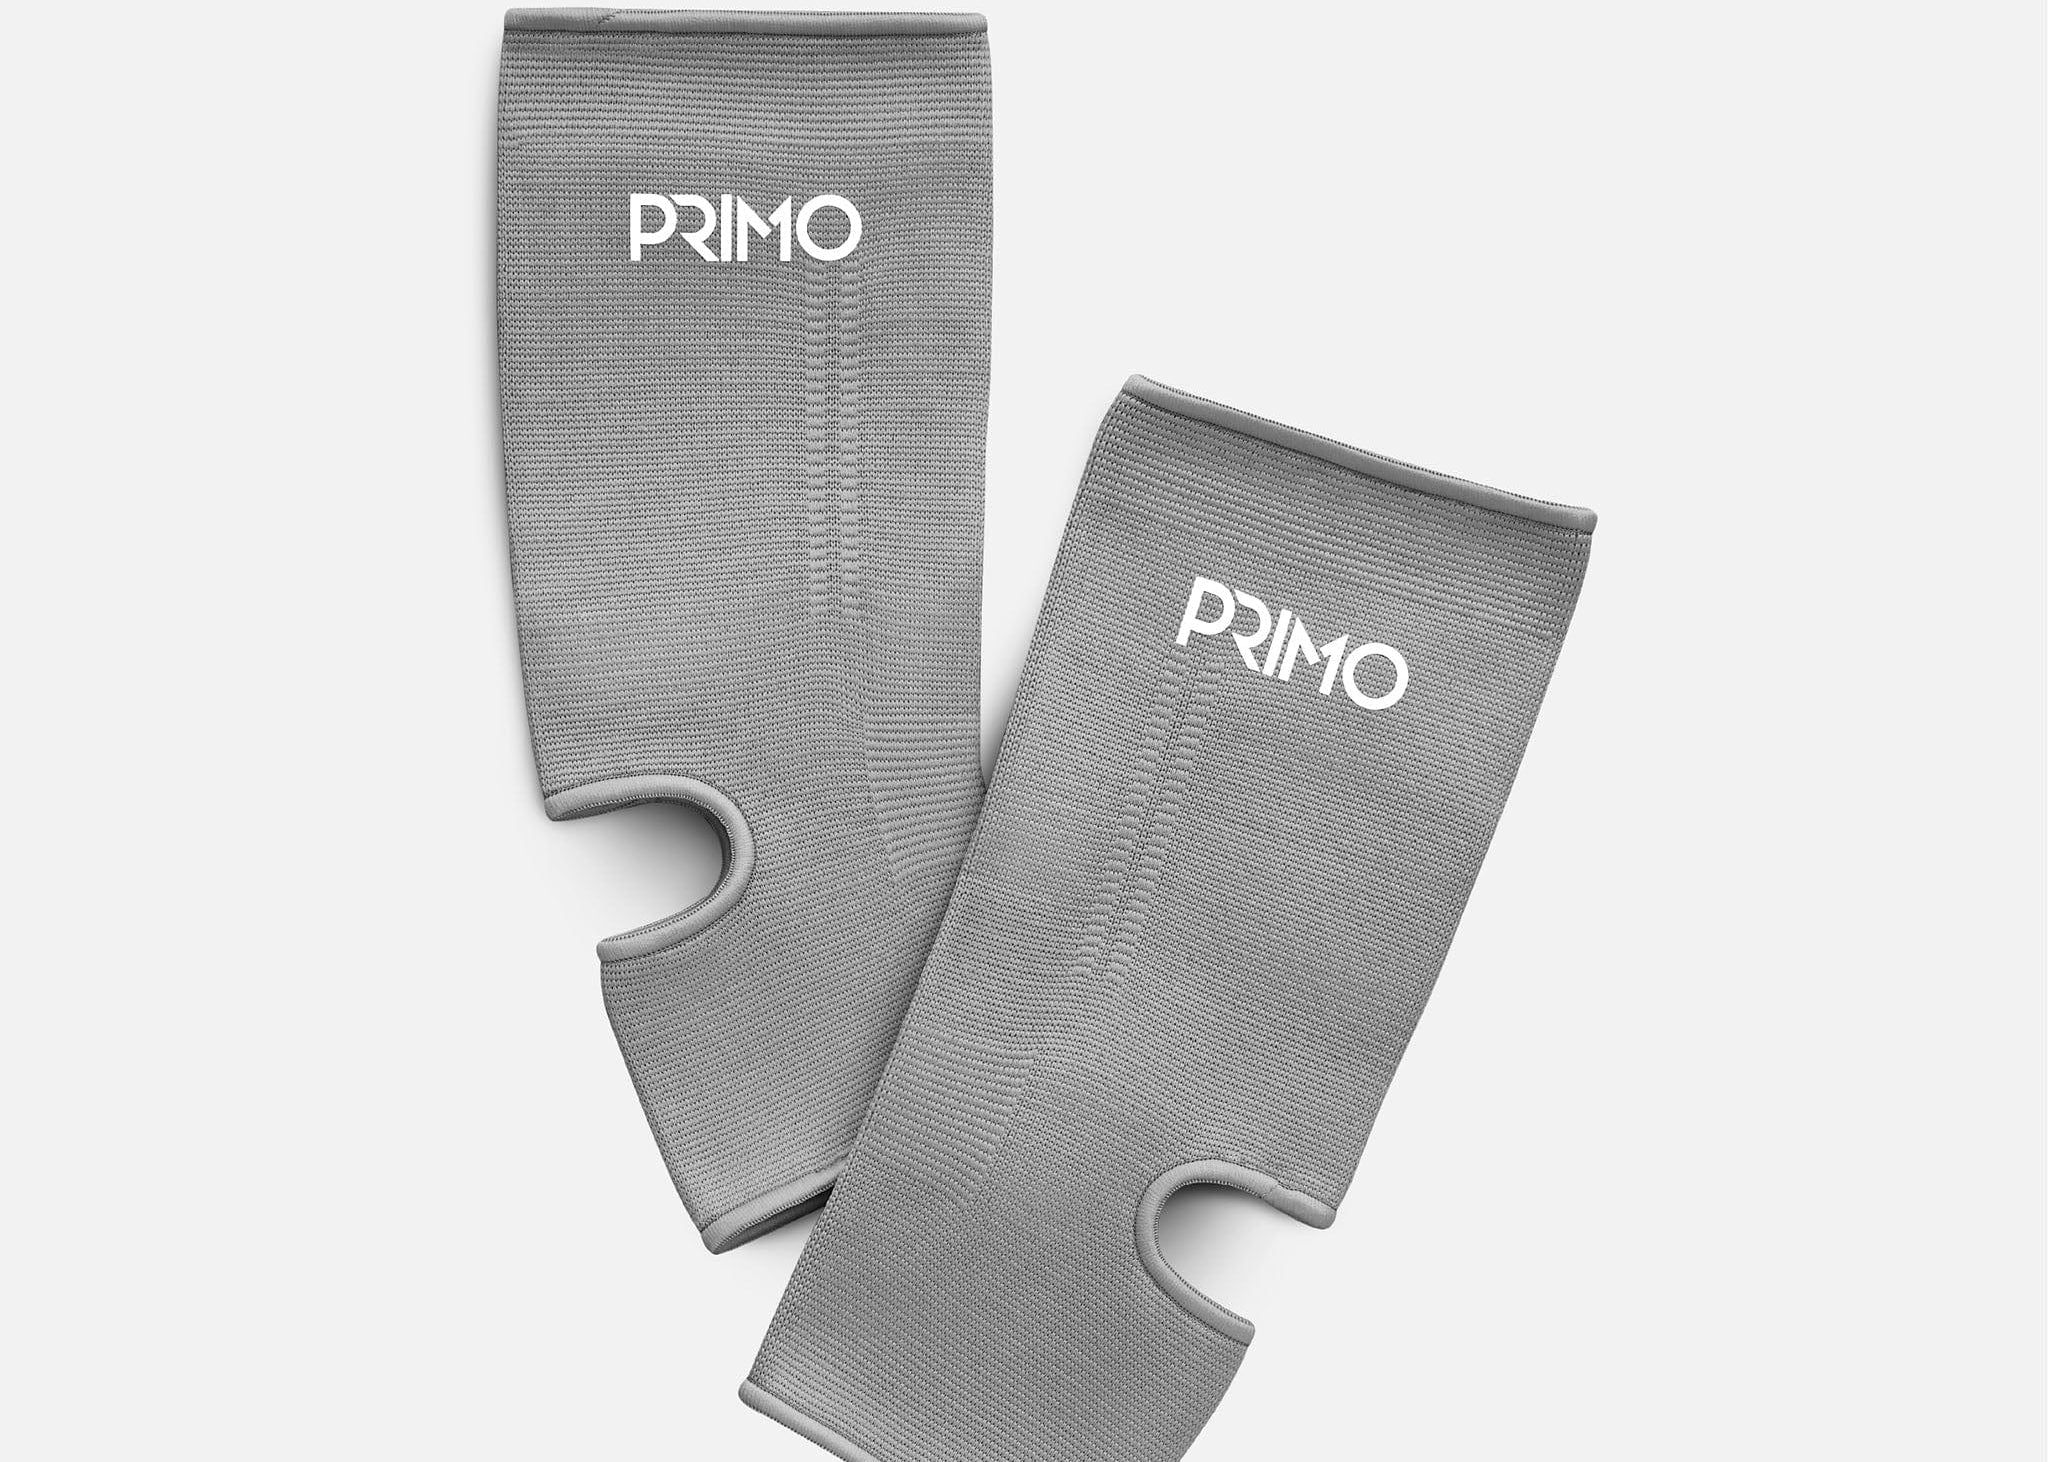 Primo Fight Wear Official Primo Monochrome Ankleguards - Grey